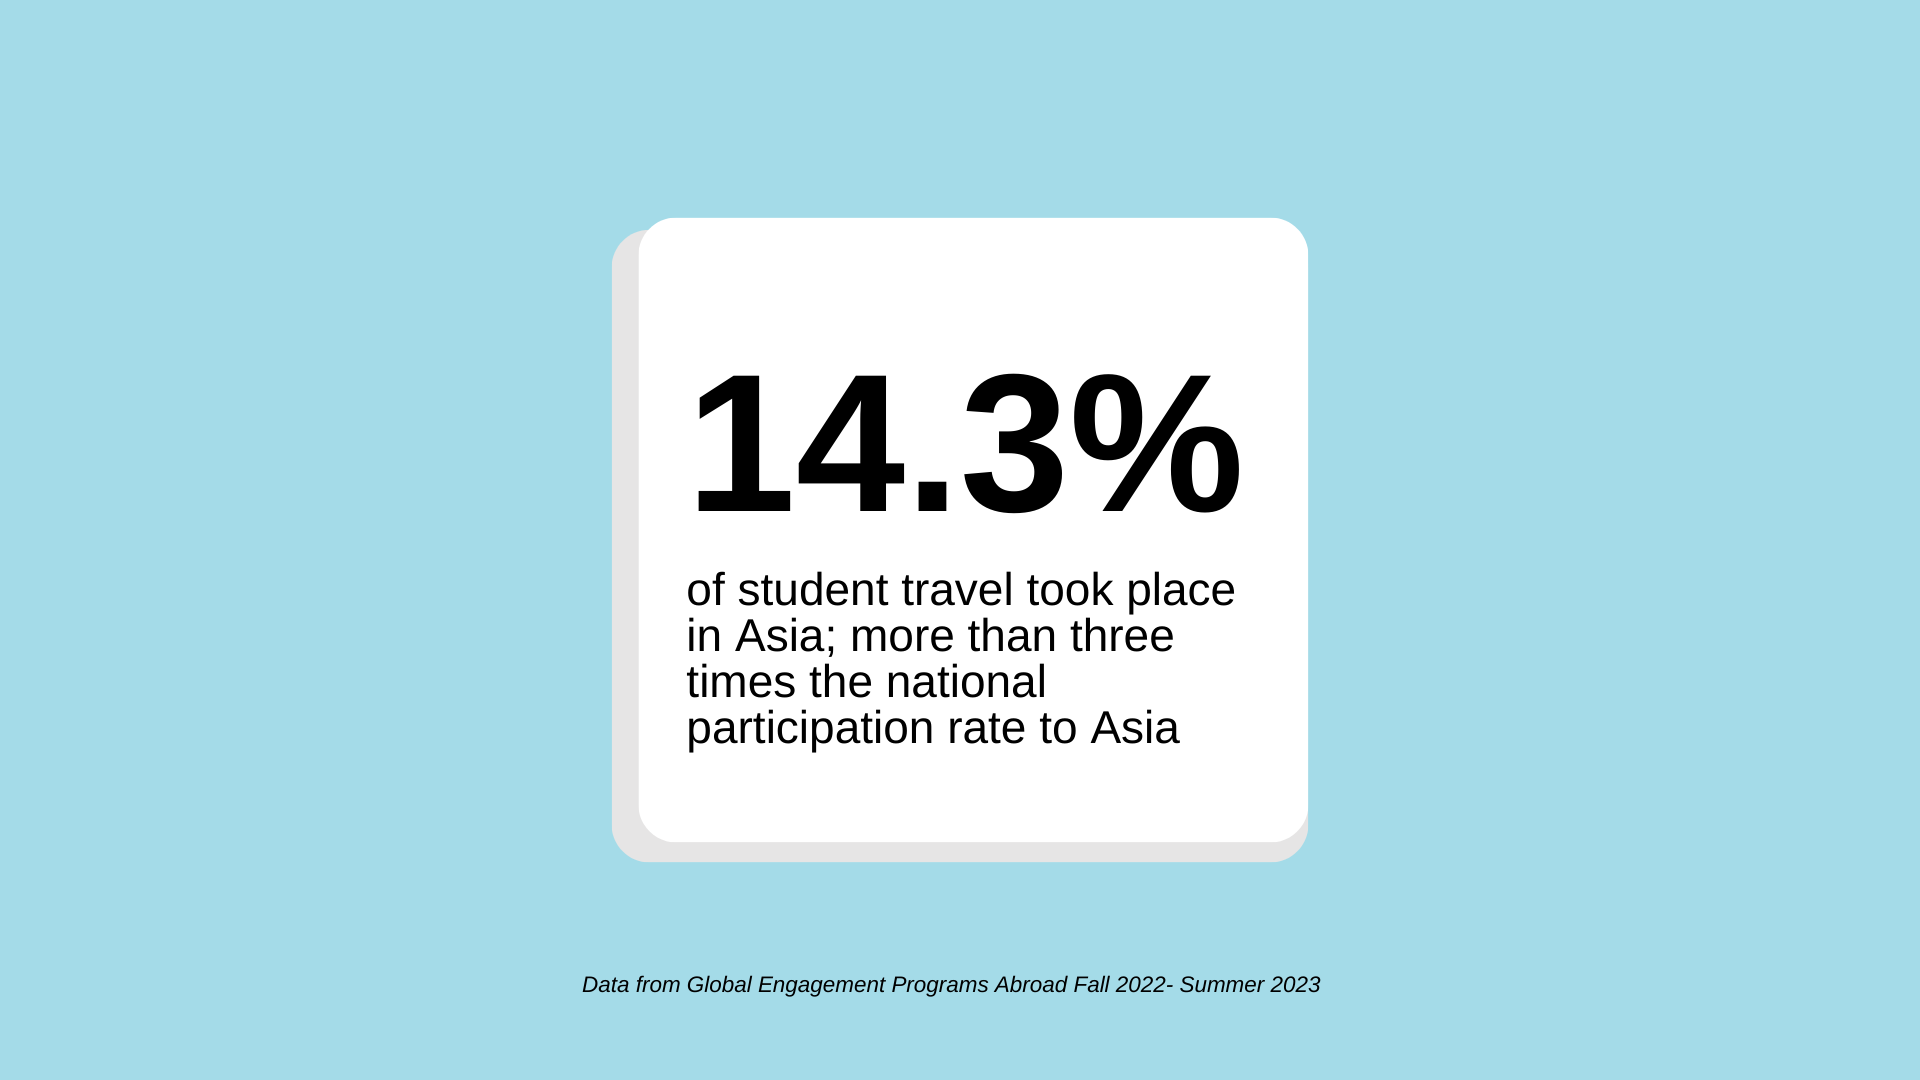 14.3% of student travel took place in Asia; more than three times the national participation rate to Asia; data from Data from Global Engagement Programs Abroad Fall 2022- Summer 2023